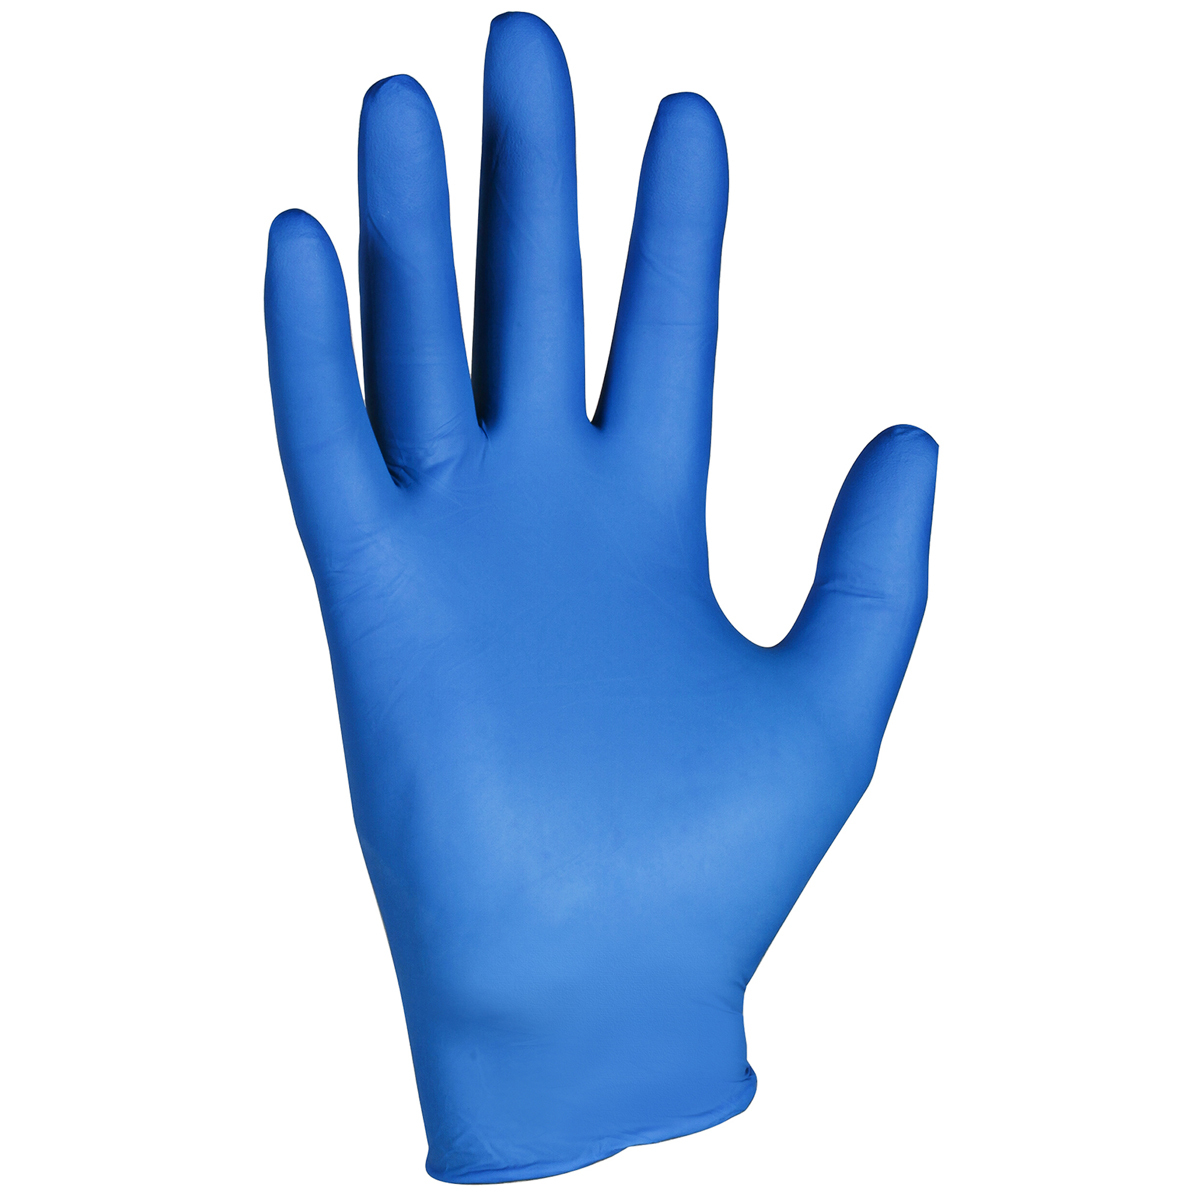 Kimberly-Clark Professional* X-Large Blue KleenGuard™ G10 2 mil Nitrile Disposable Gloves (180 Gloves Per Box) (Availability res